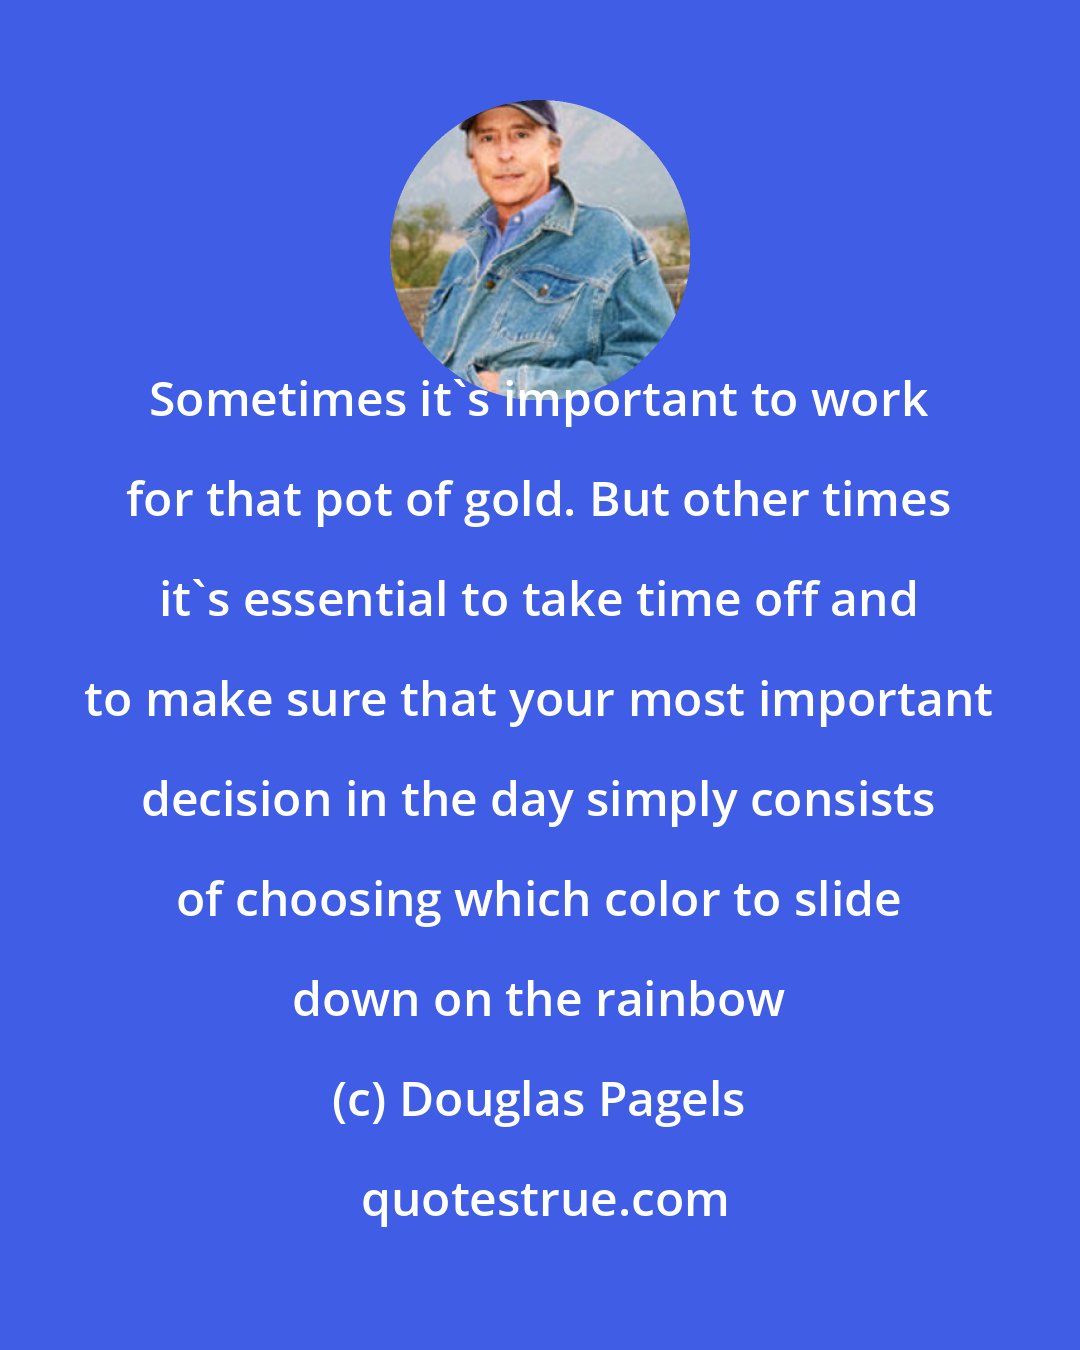 Douglas Pagels: Sometimes it's important to work for that pot of gold. But other times it's essential to take time off and to make sure that your most important decision in the day simply consists of choosing which color to slide down on the rainbow